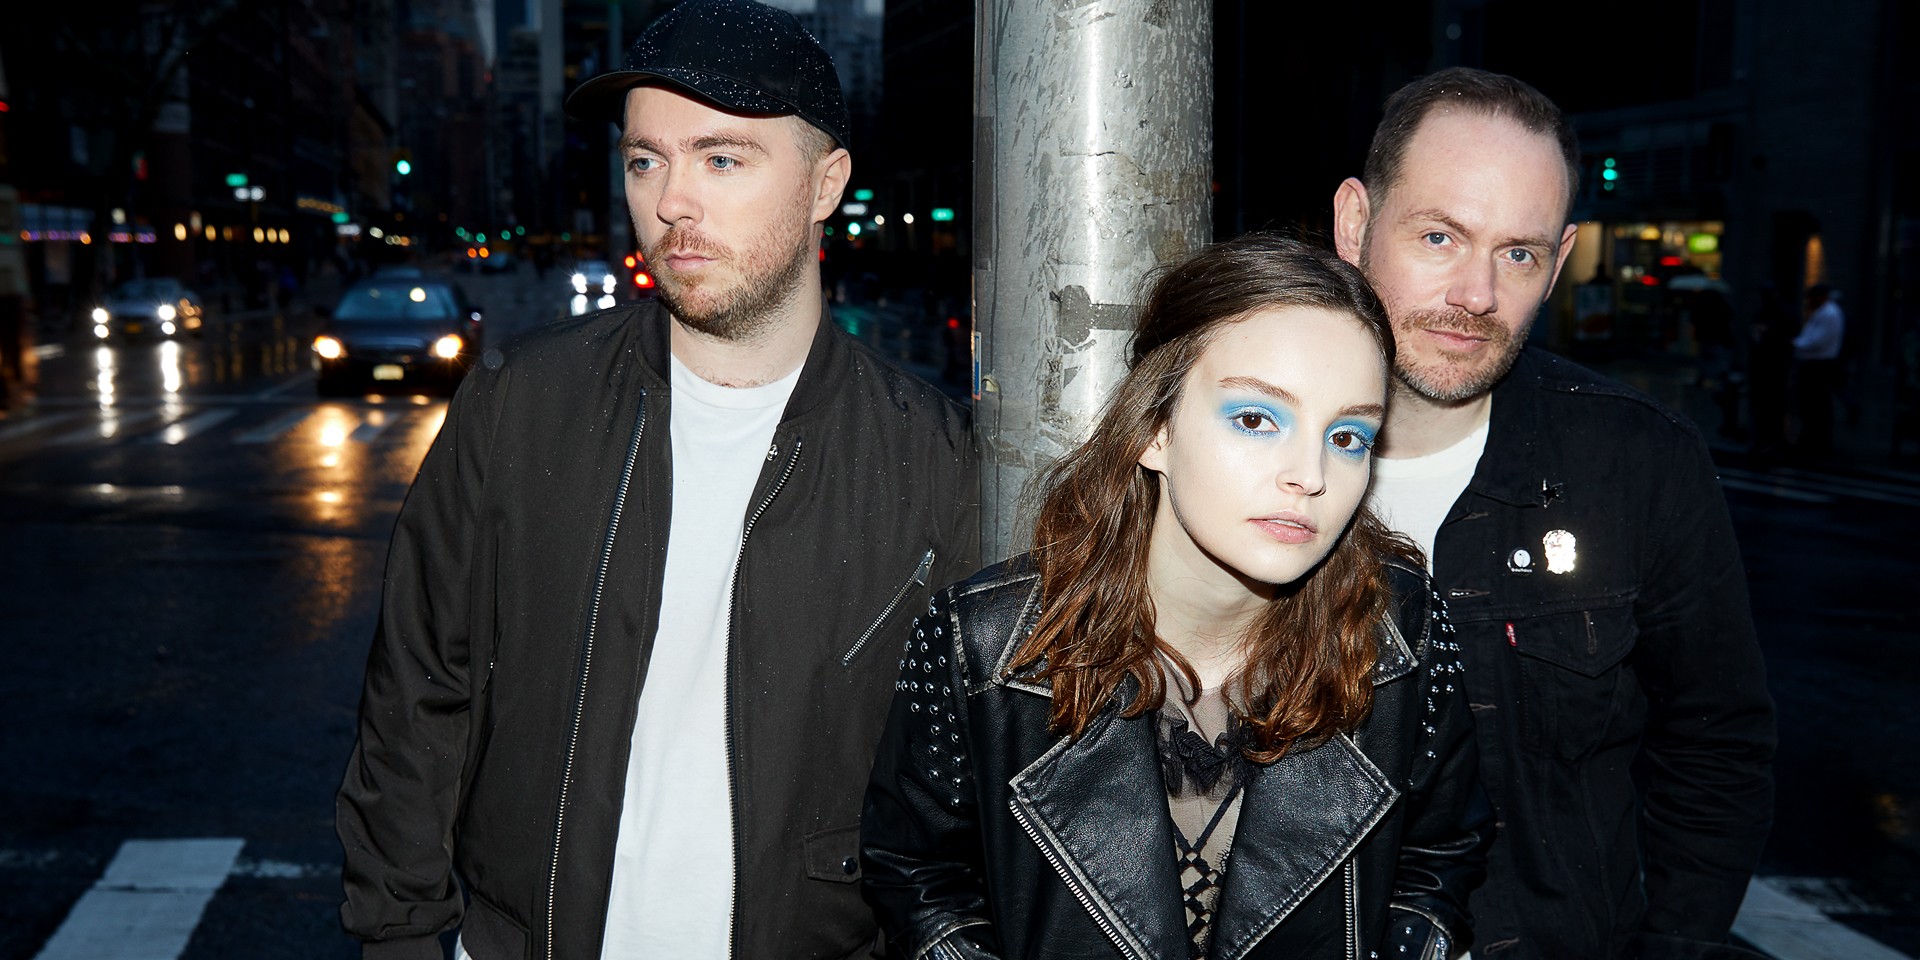 CHVRCHES' Martin Doherty talks new album, dealing with pressure, returning to Southeast Asia and more